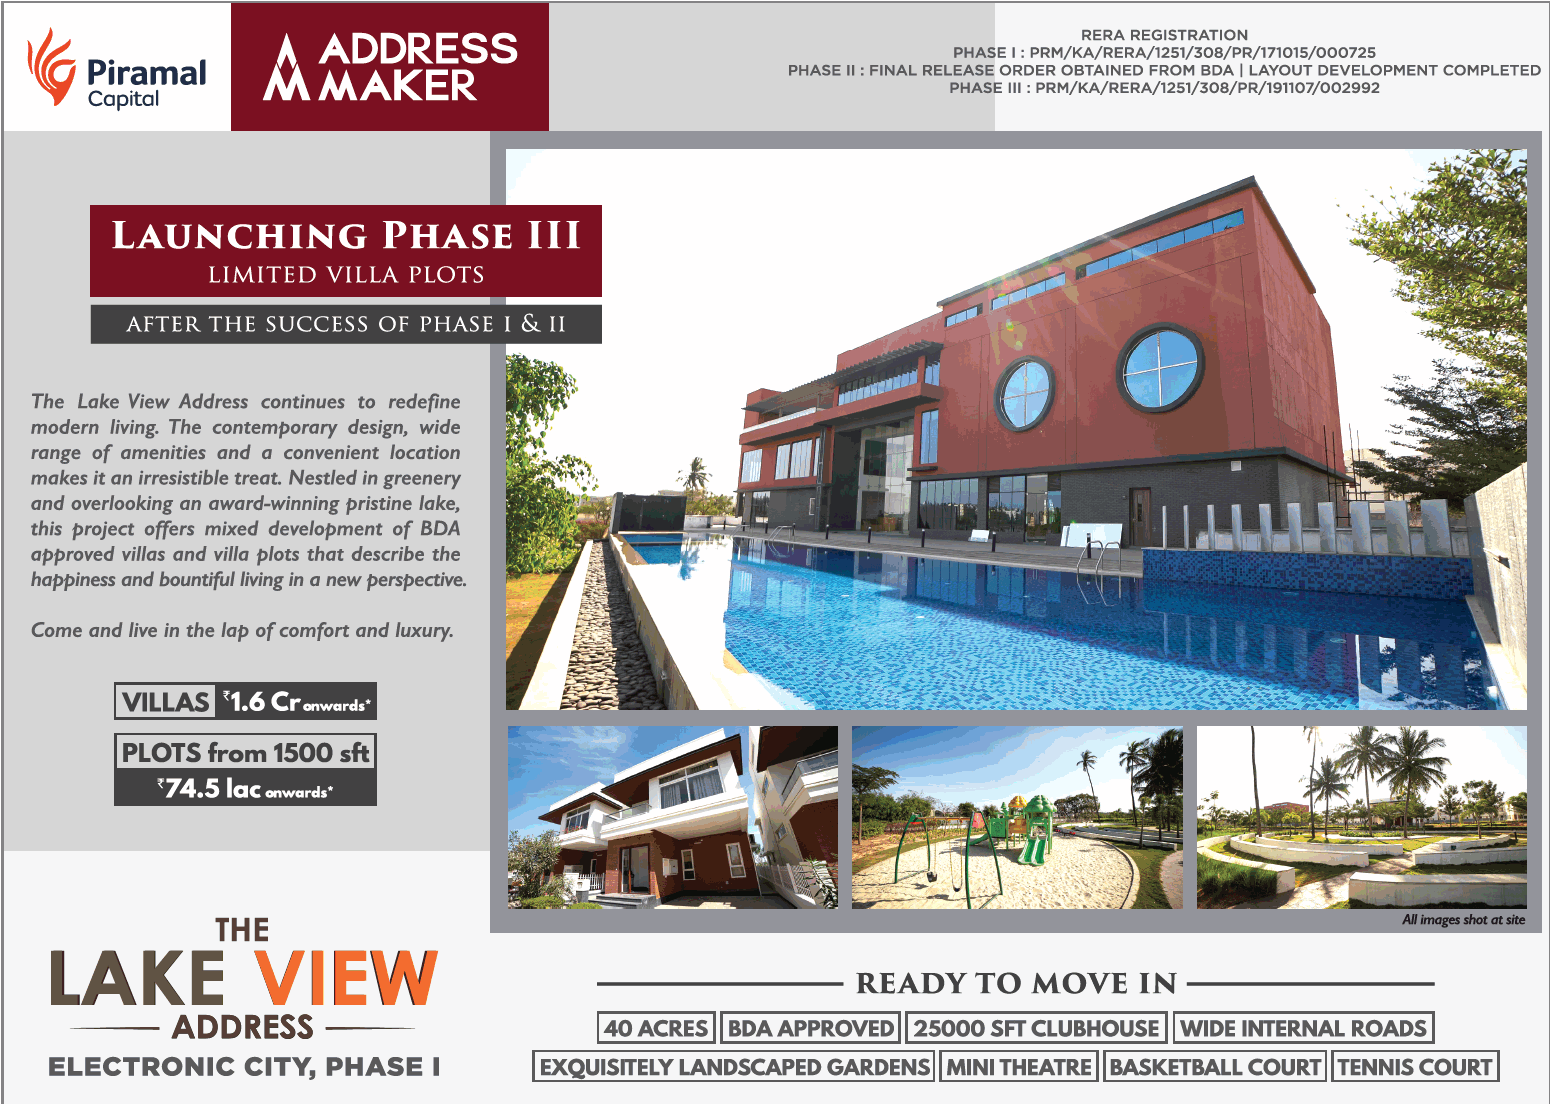 Villas Rs 1.6 Cr onwards at The Lake View Address in Bangalore Update